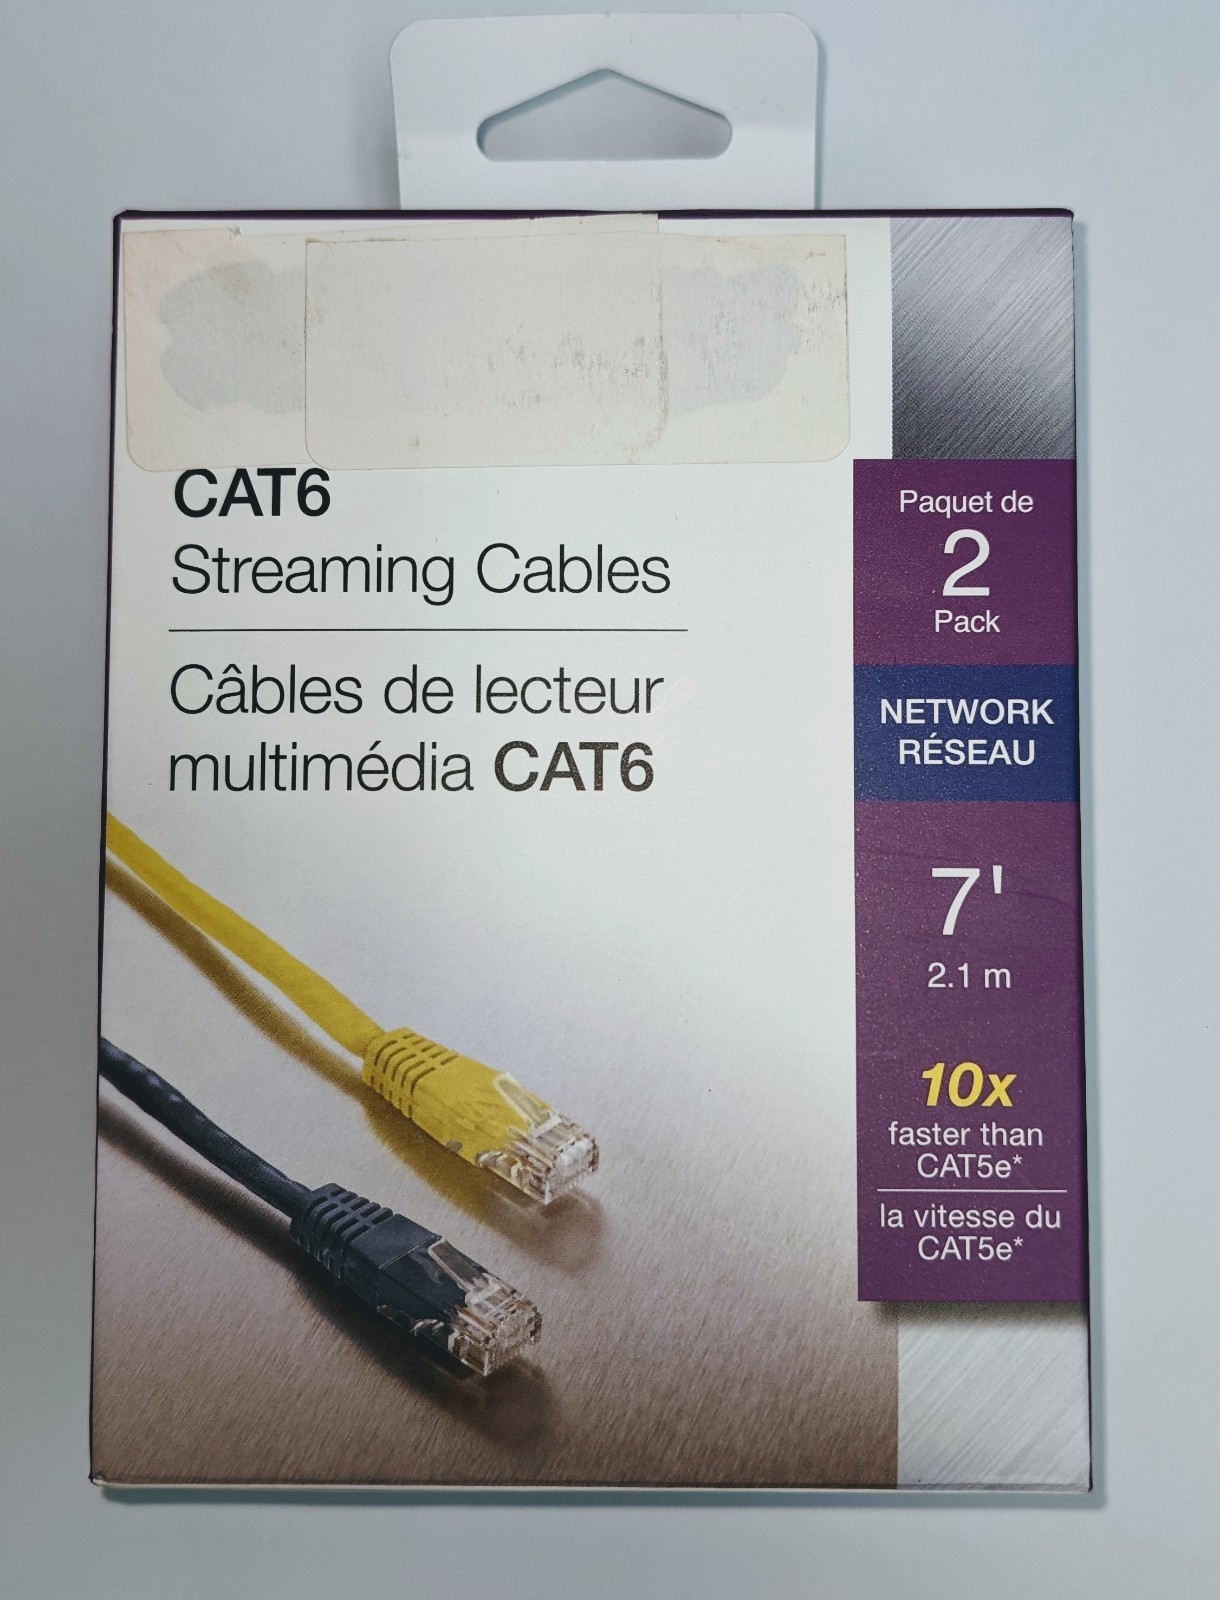 CAT6 Streaming Cables